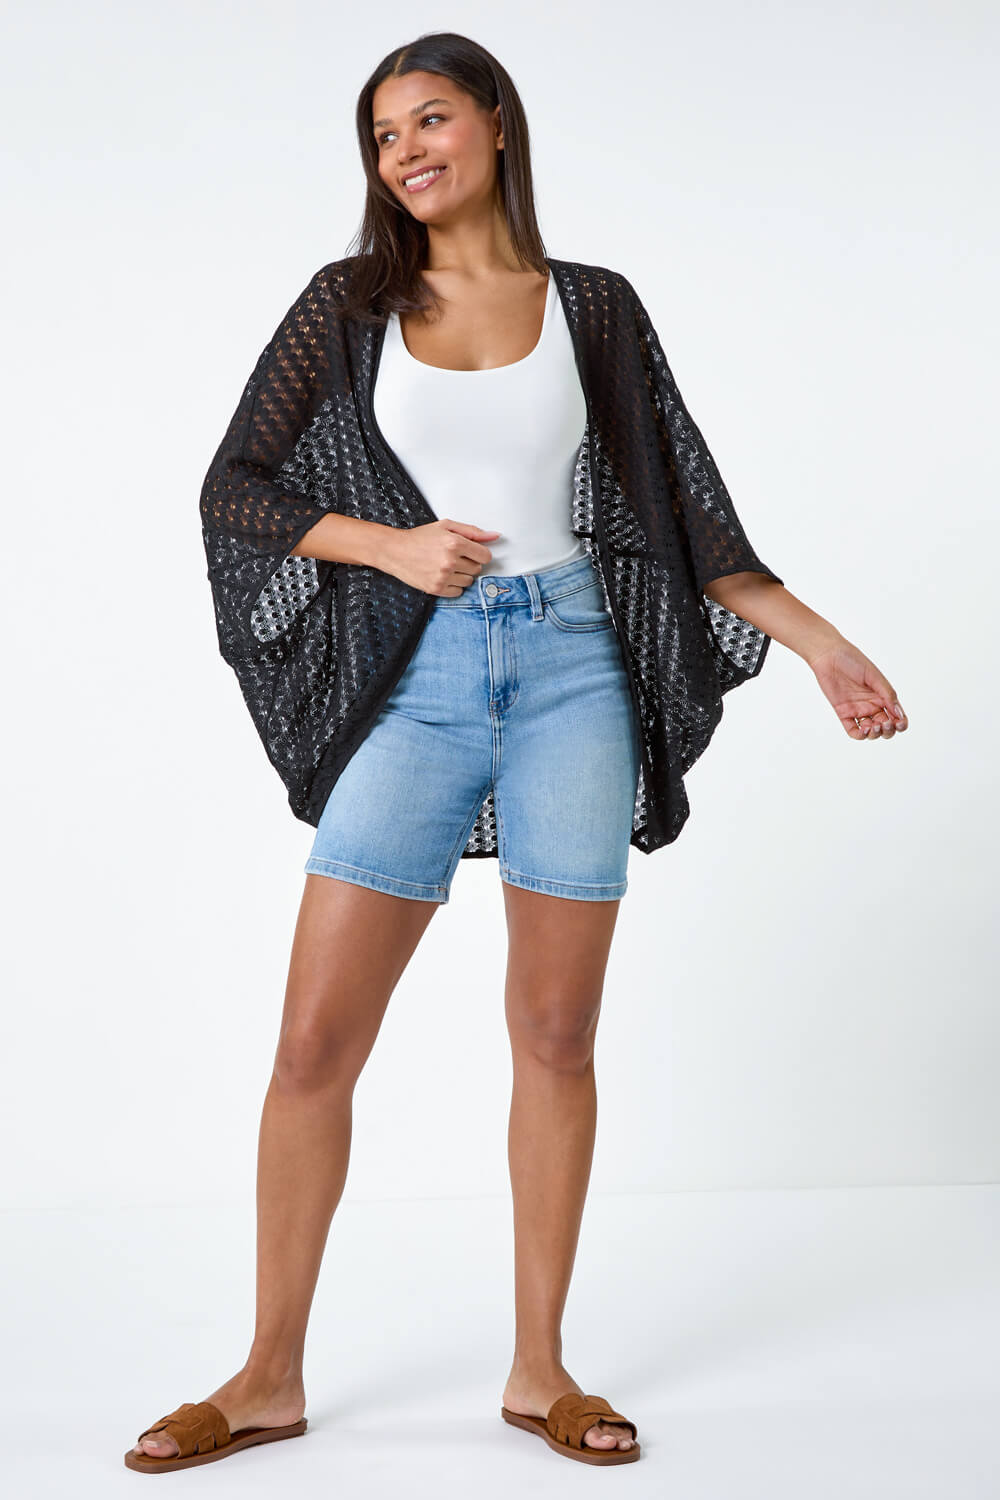 Black Textured Knit Cardigan Cover Up, Image 2 of 5